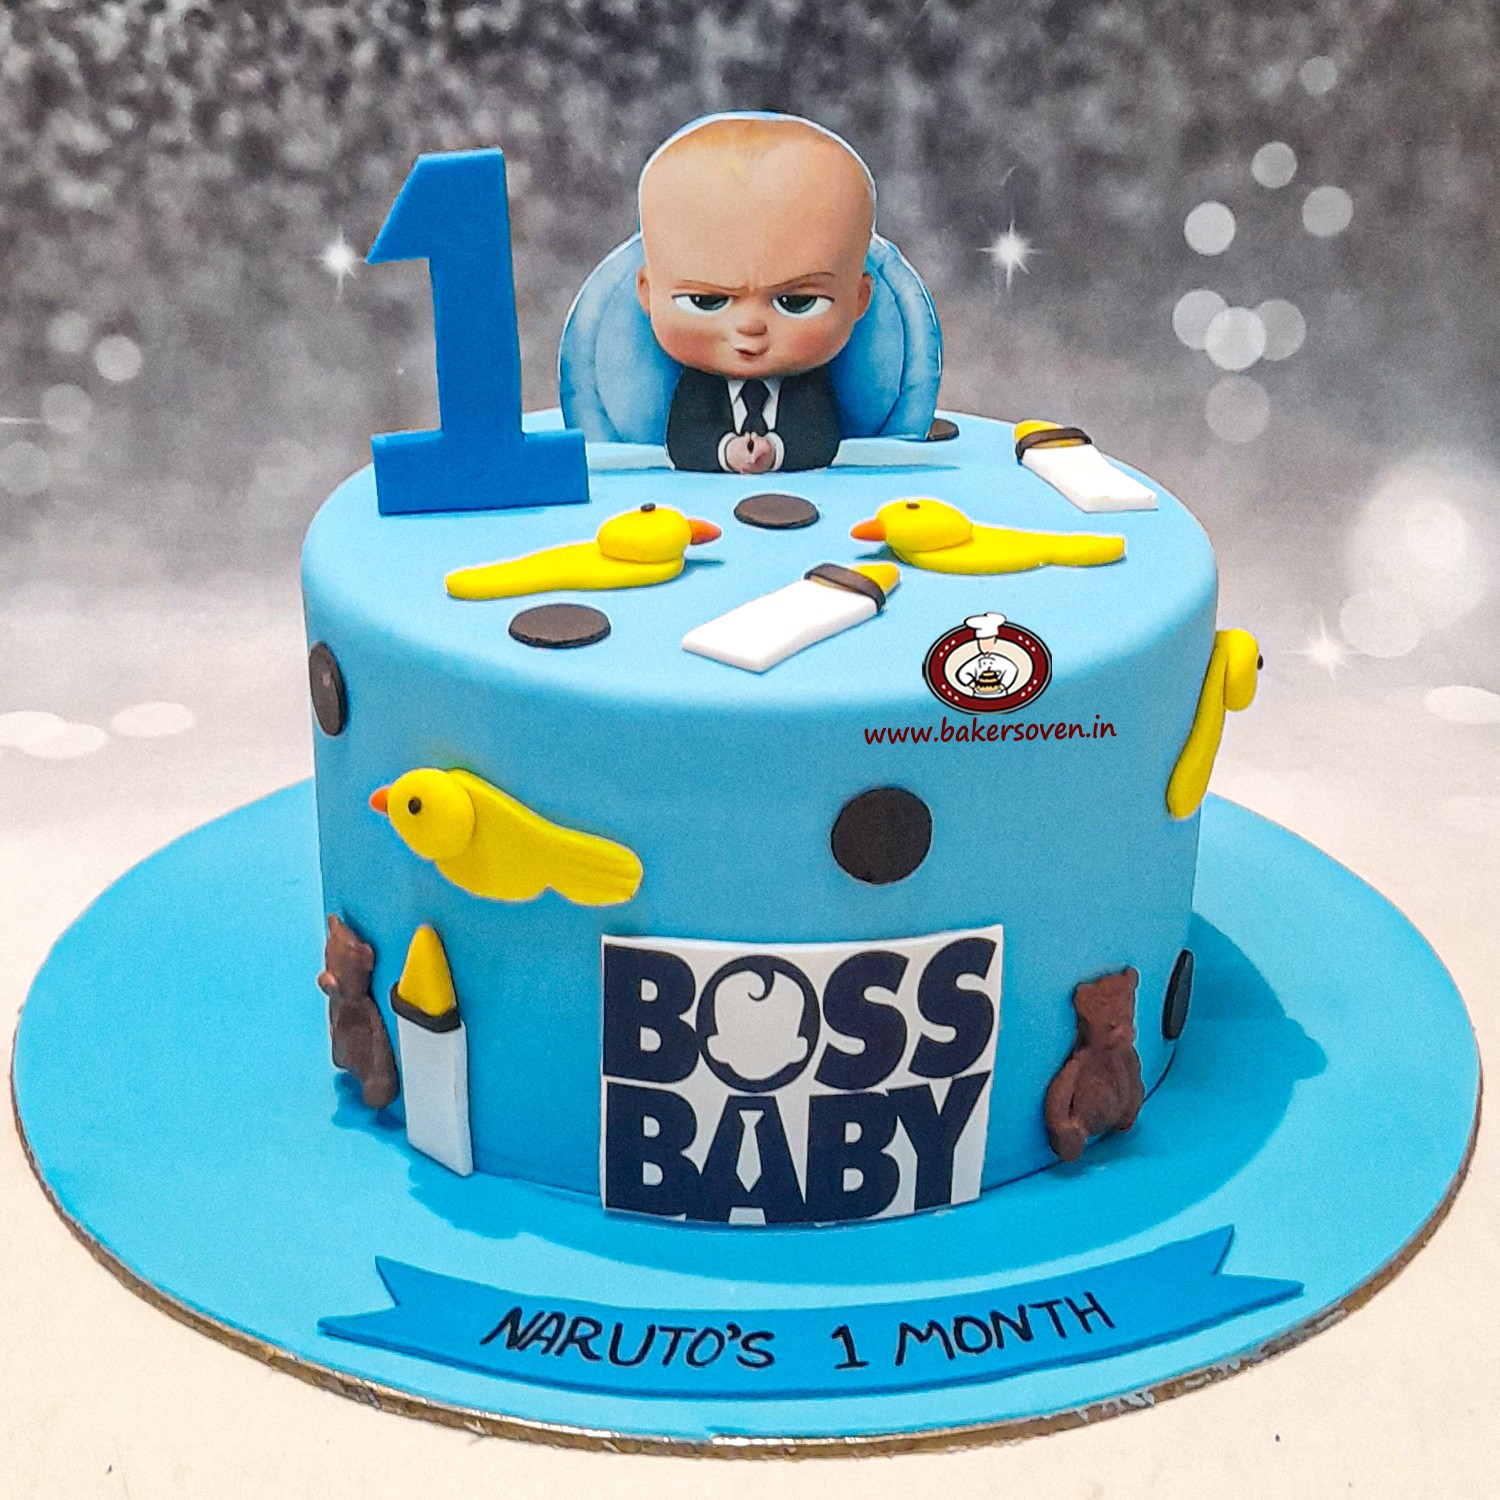 Personalised Digital Cake Topper Boss Baby Theme Topper for Birthday Party  Celebration